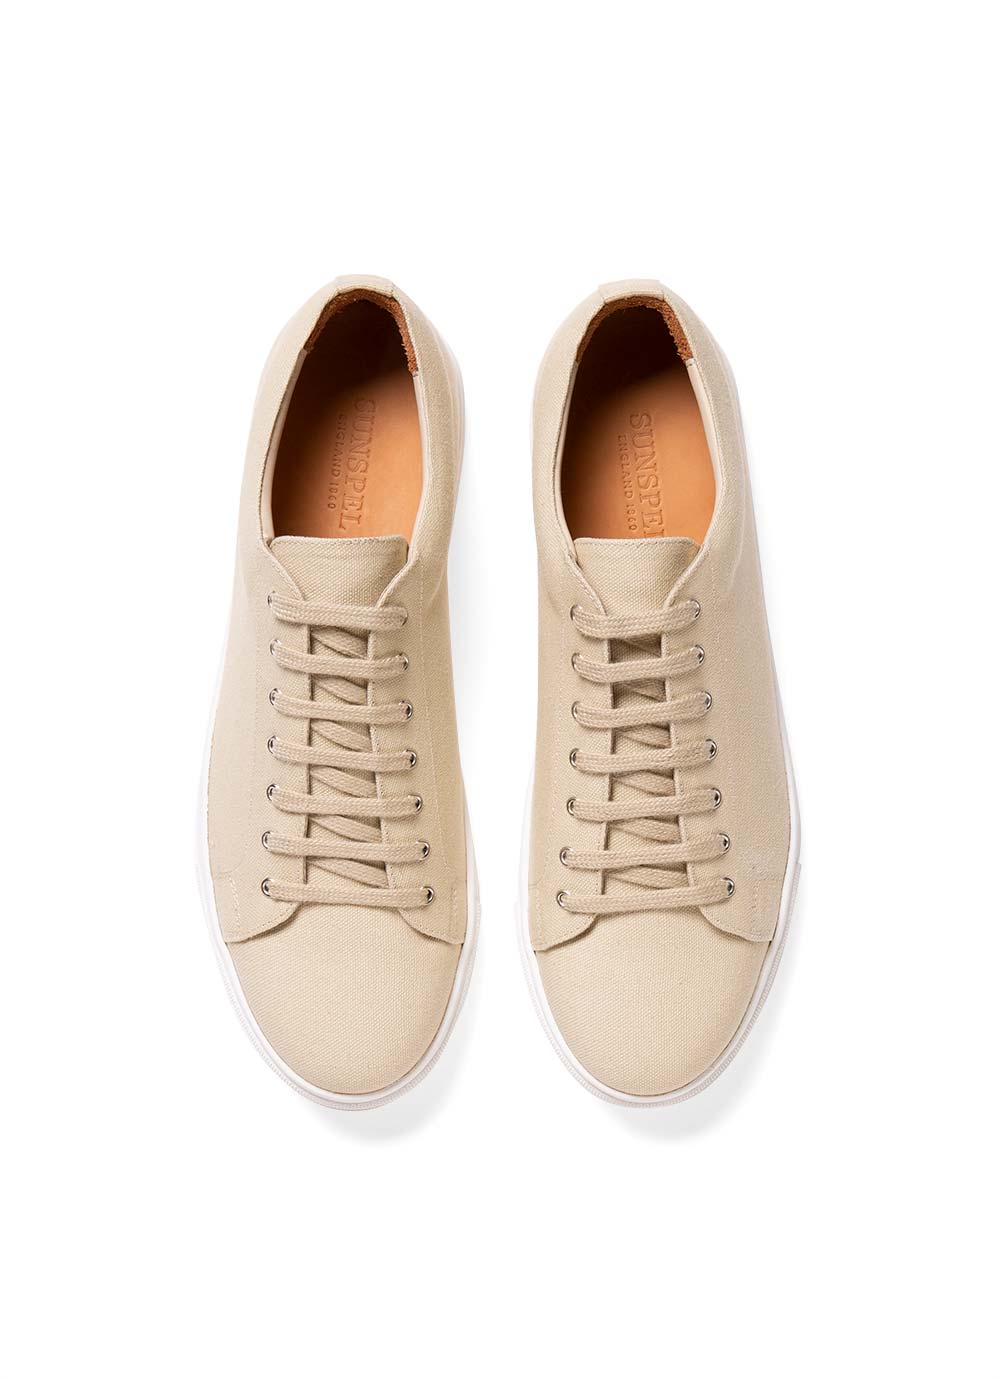 Men's Canvas Tennis Shoes in Stone